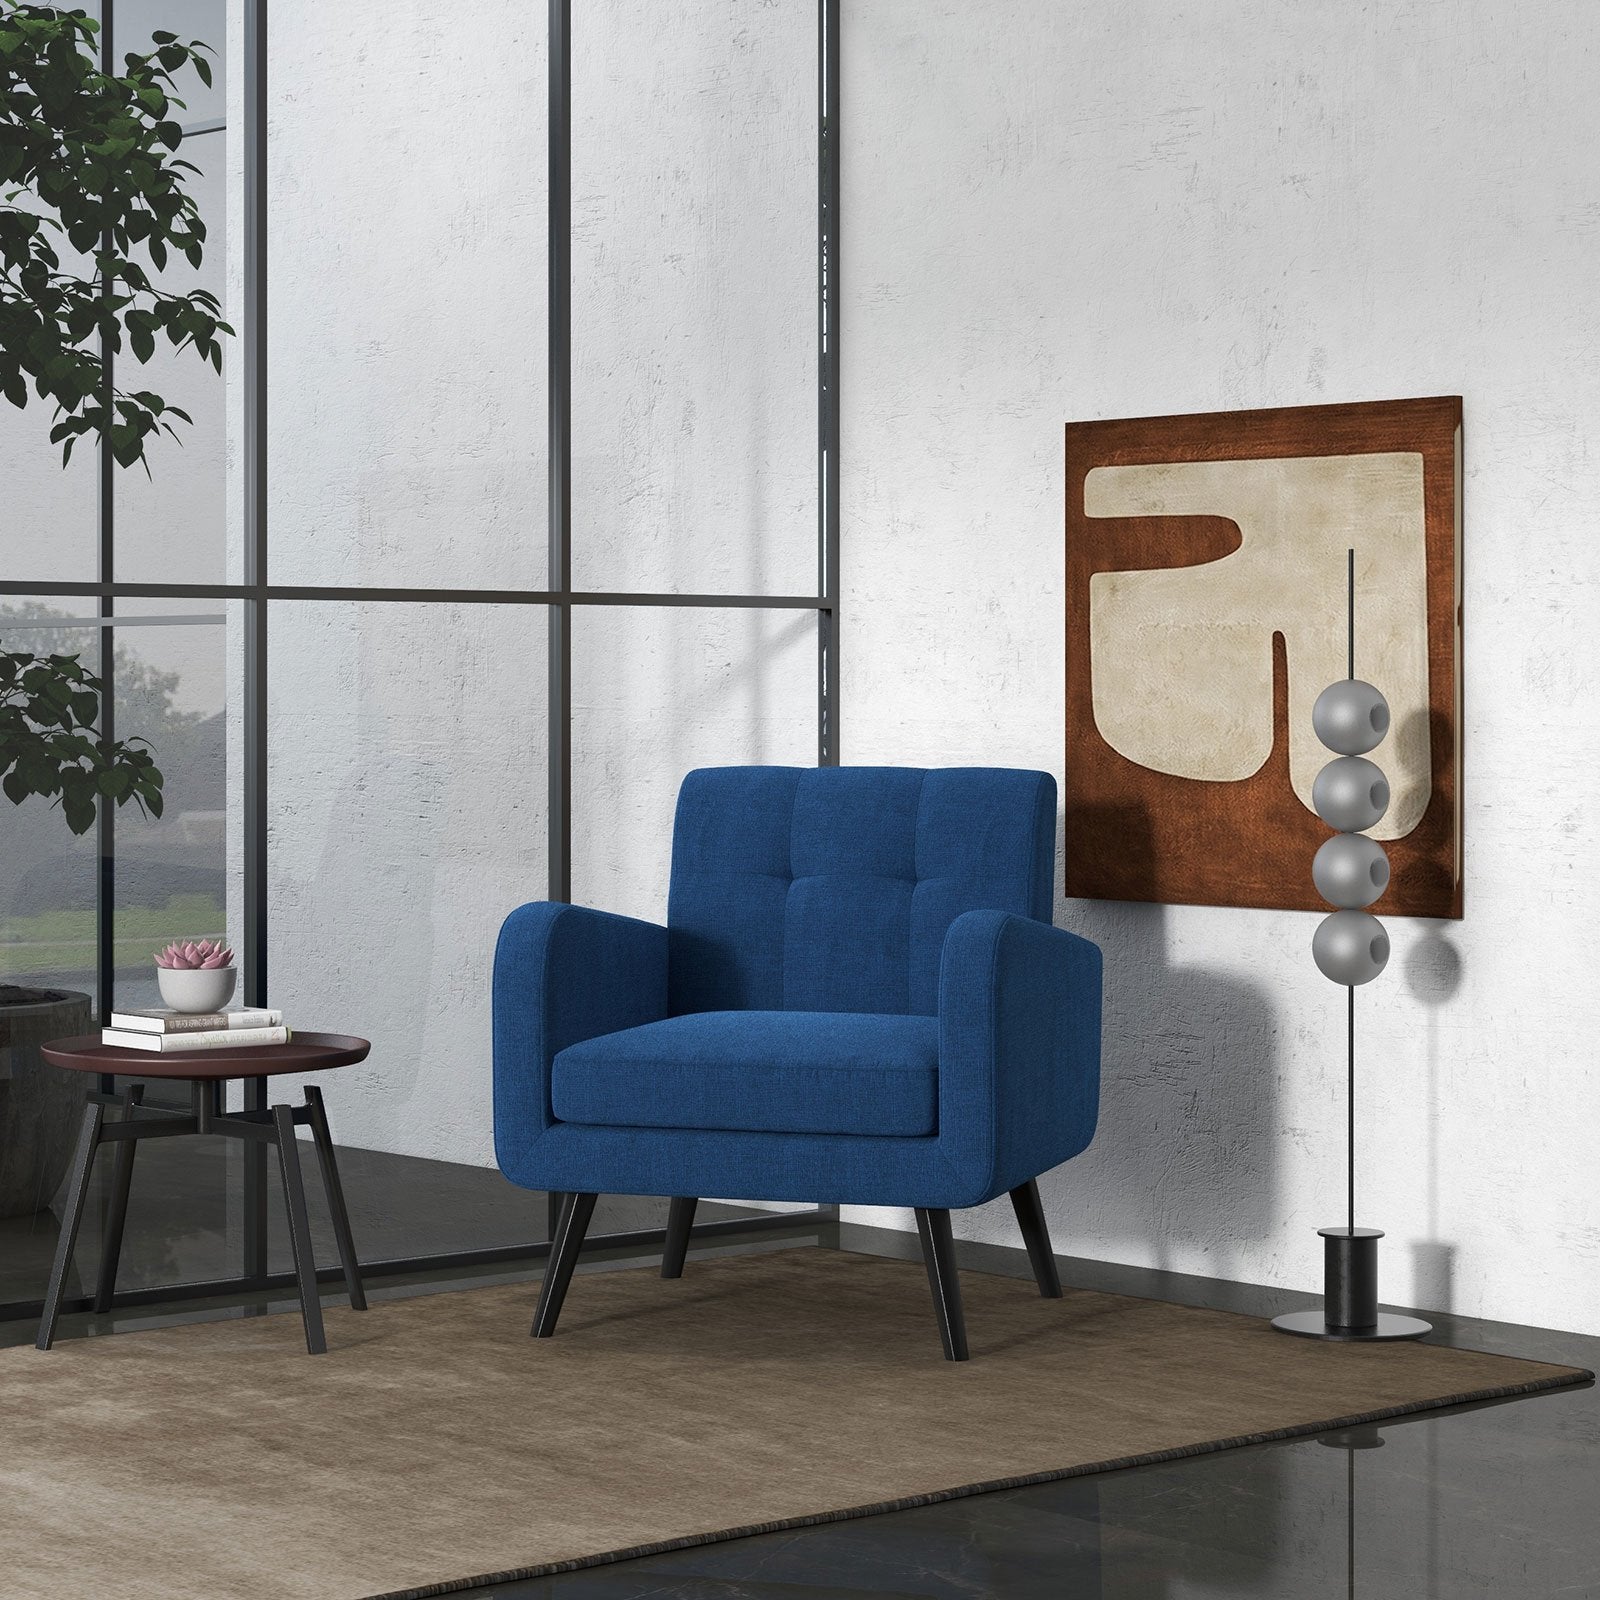 Modern Upholstered Comfy Accent Chair Single Sofa with Rubber Wood Legs, Navy - Gallery Canada